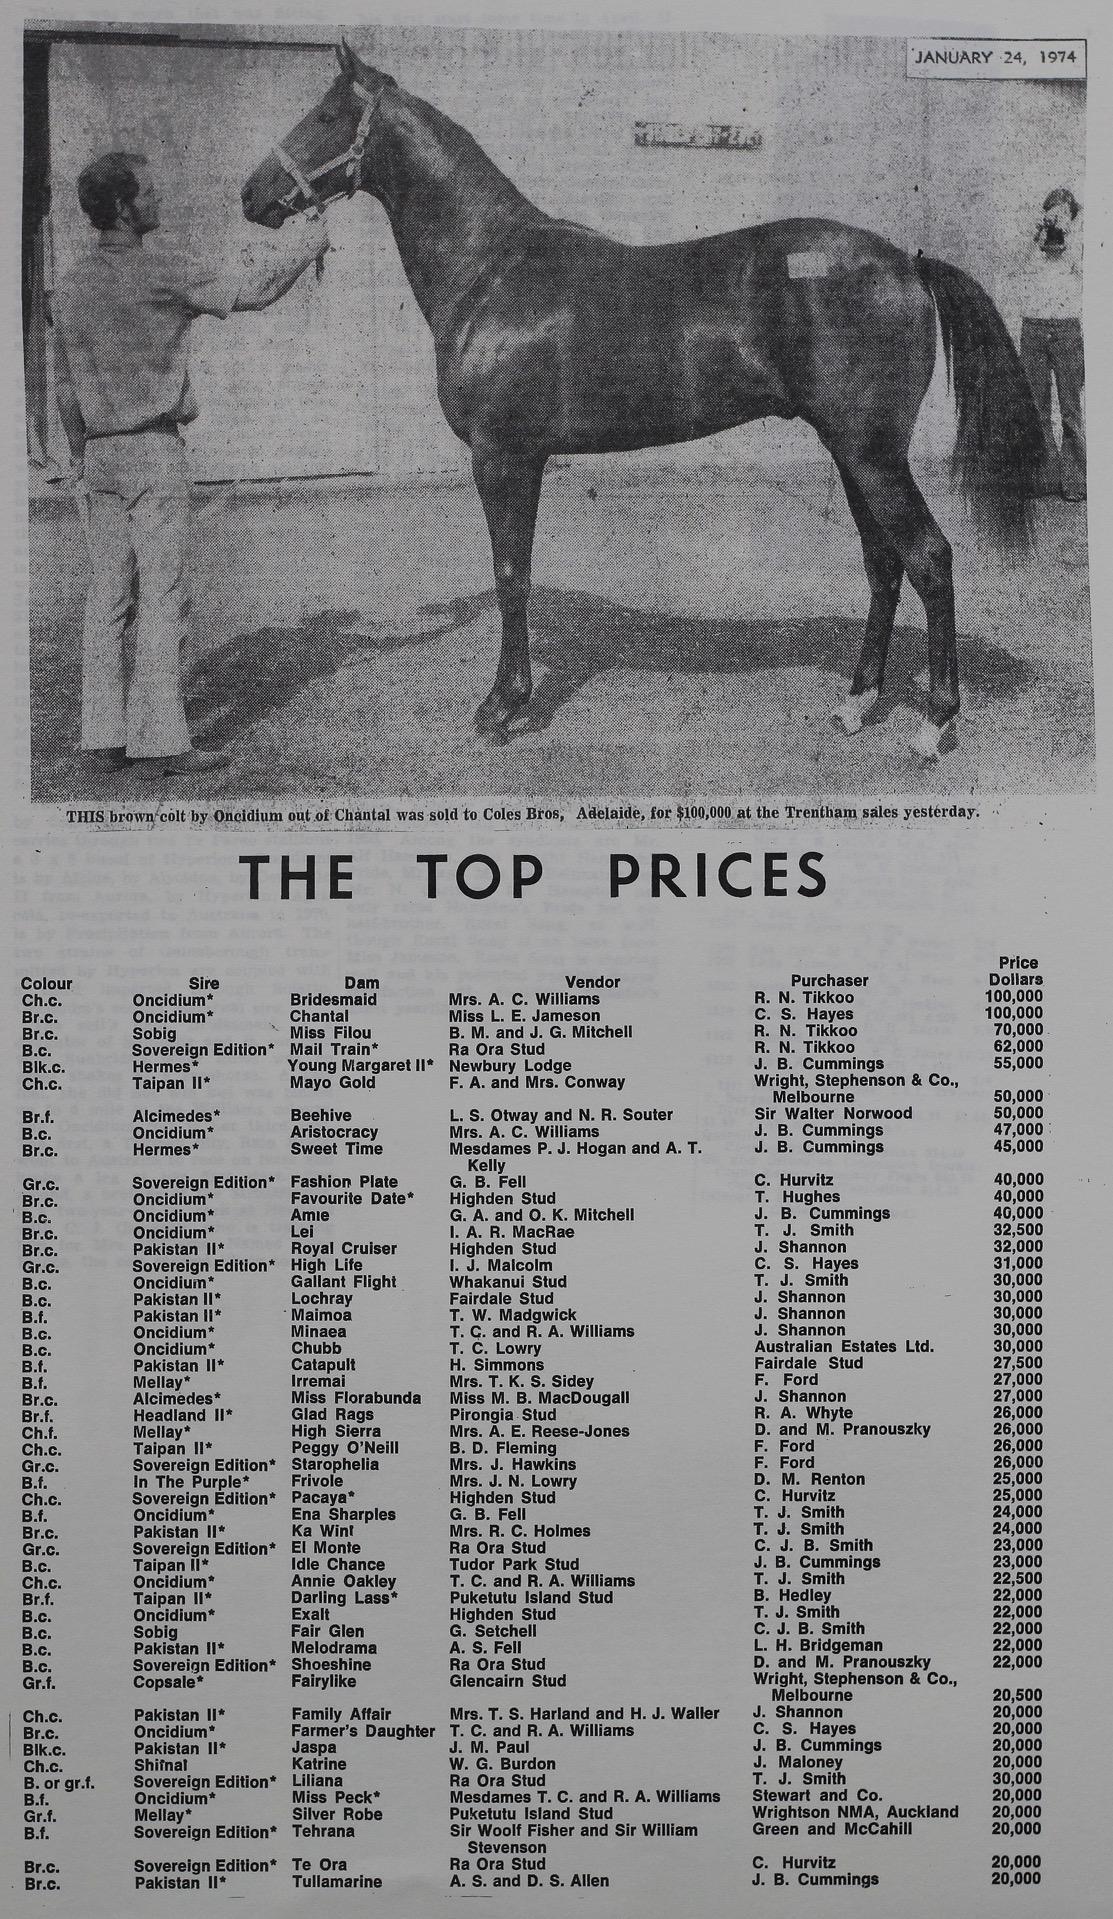 The Top Prices